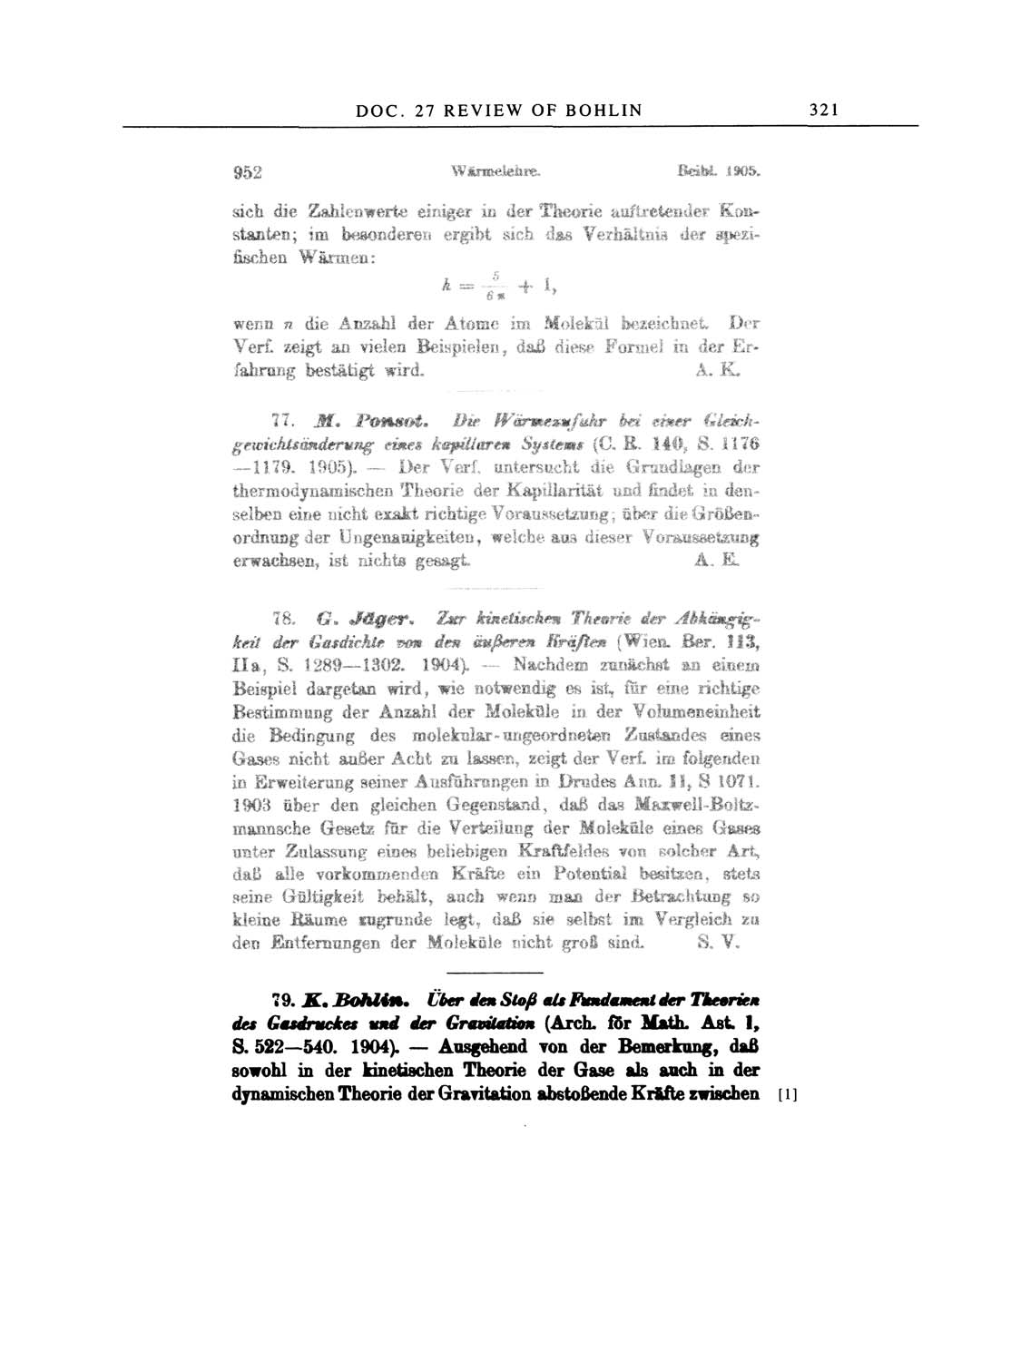 Volume 2: The Swiss Years: Writings, 1900-1909 page 321